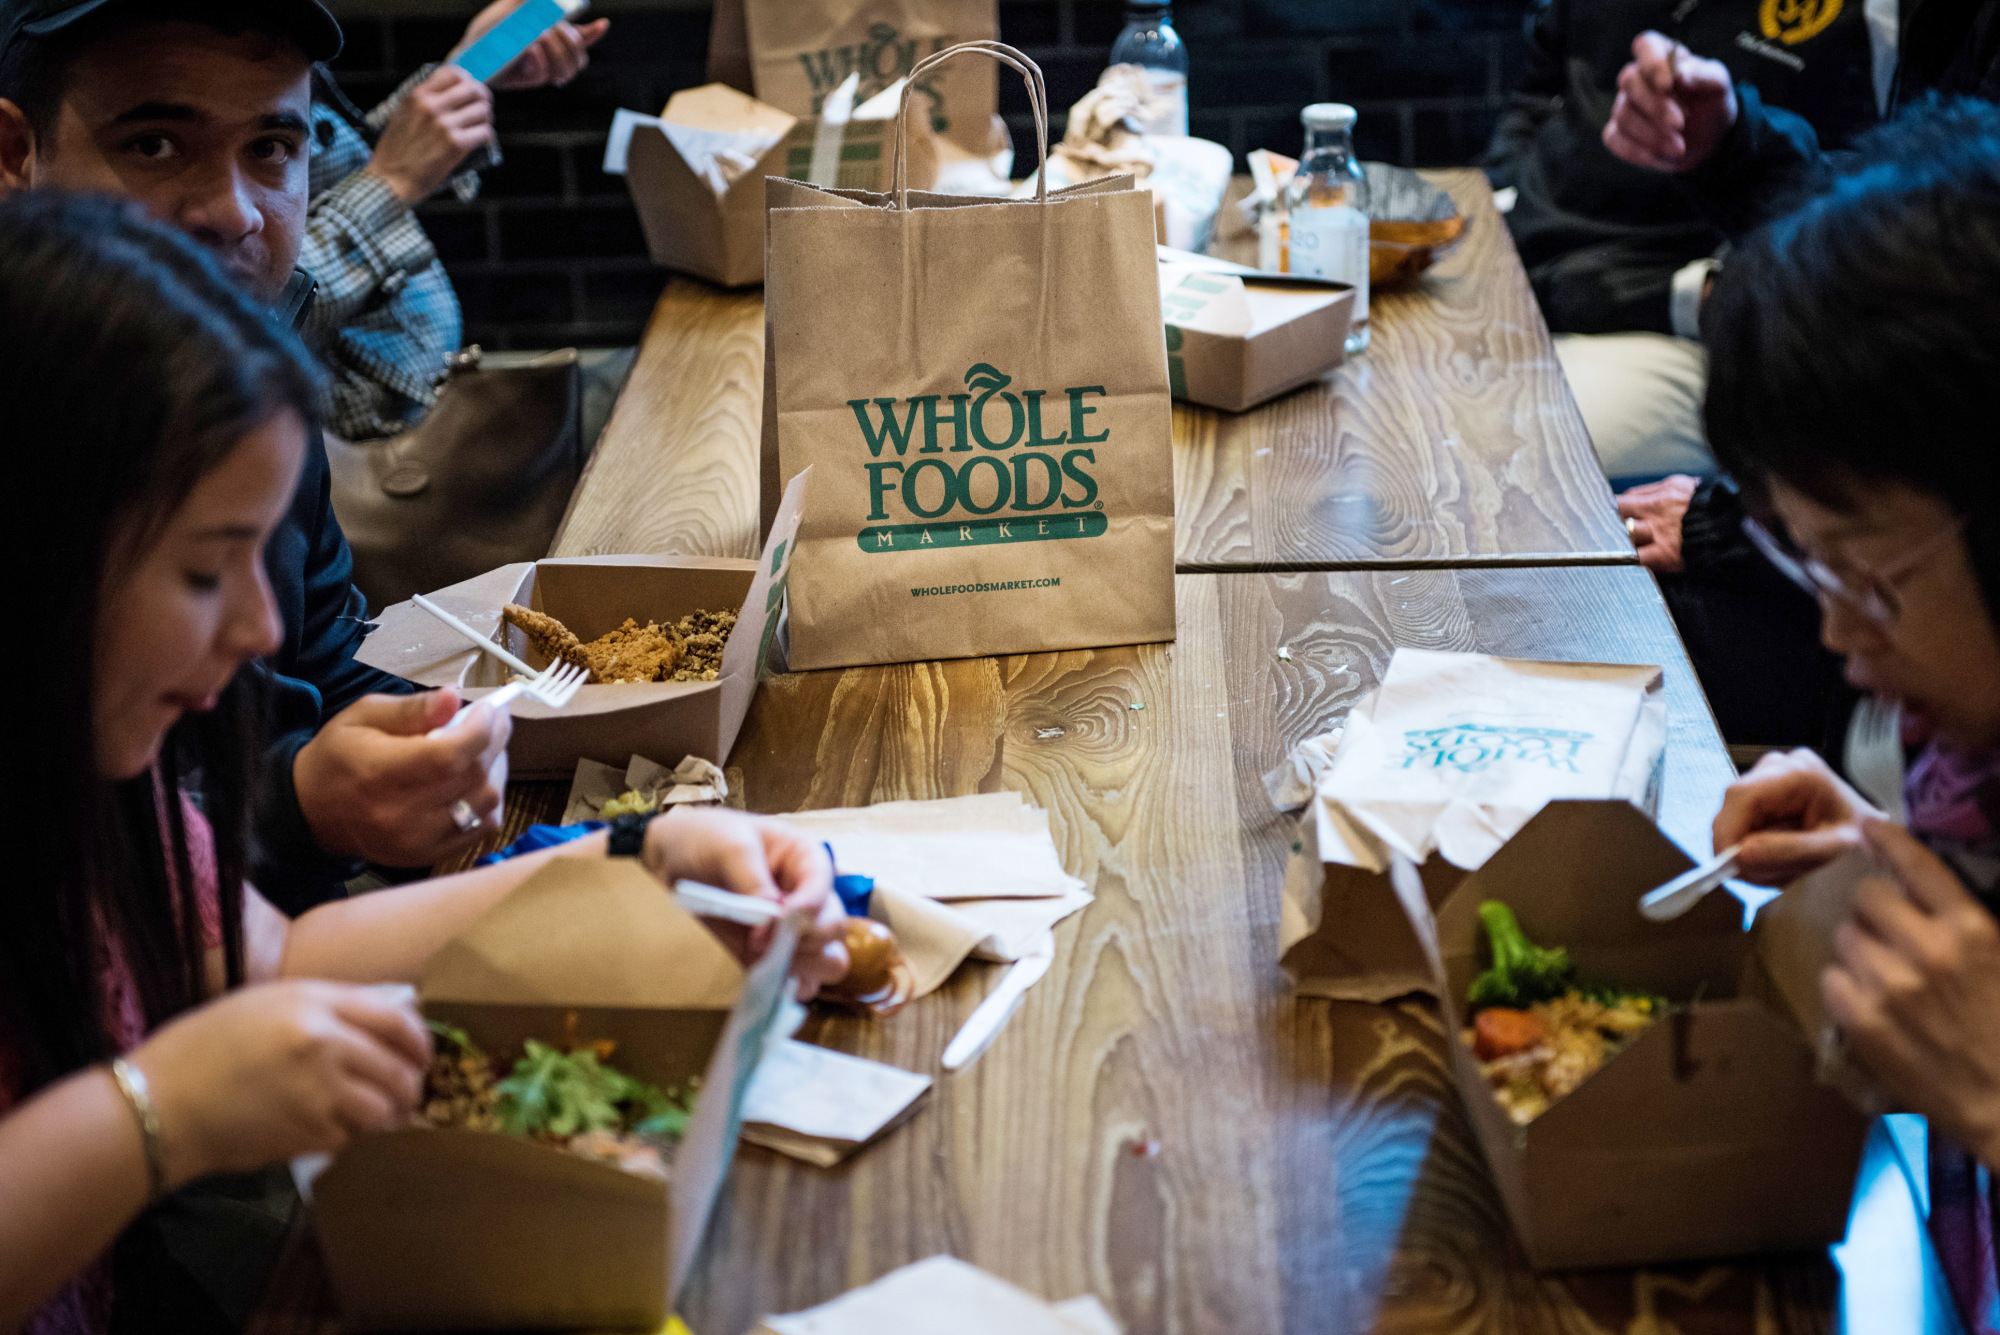 s Whole Foods Deal Has Delivered Mixed Results - Bloomberg